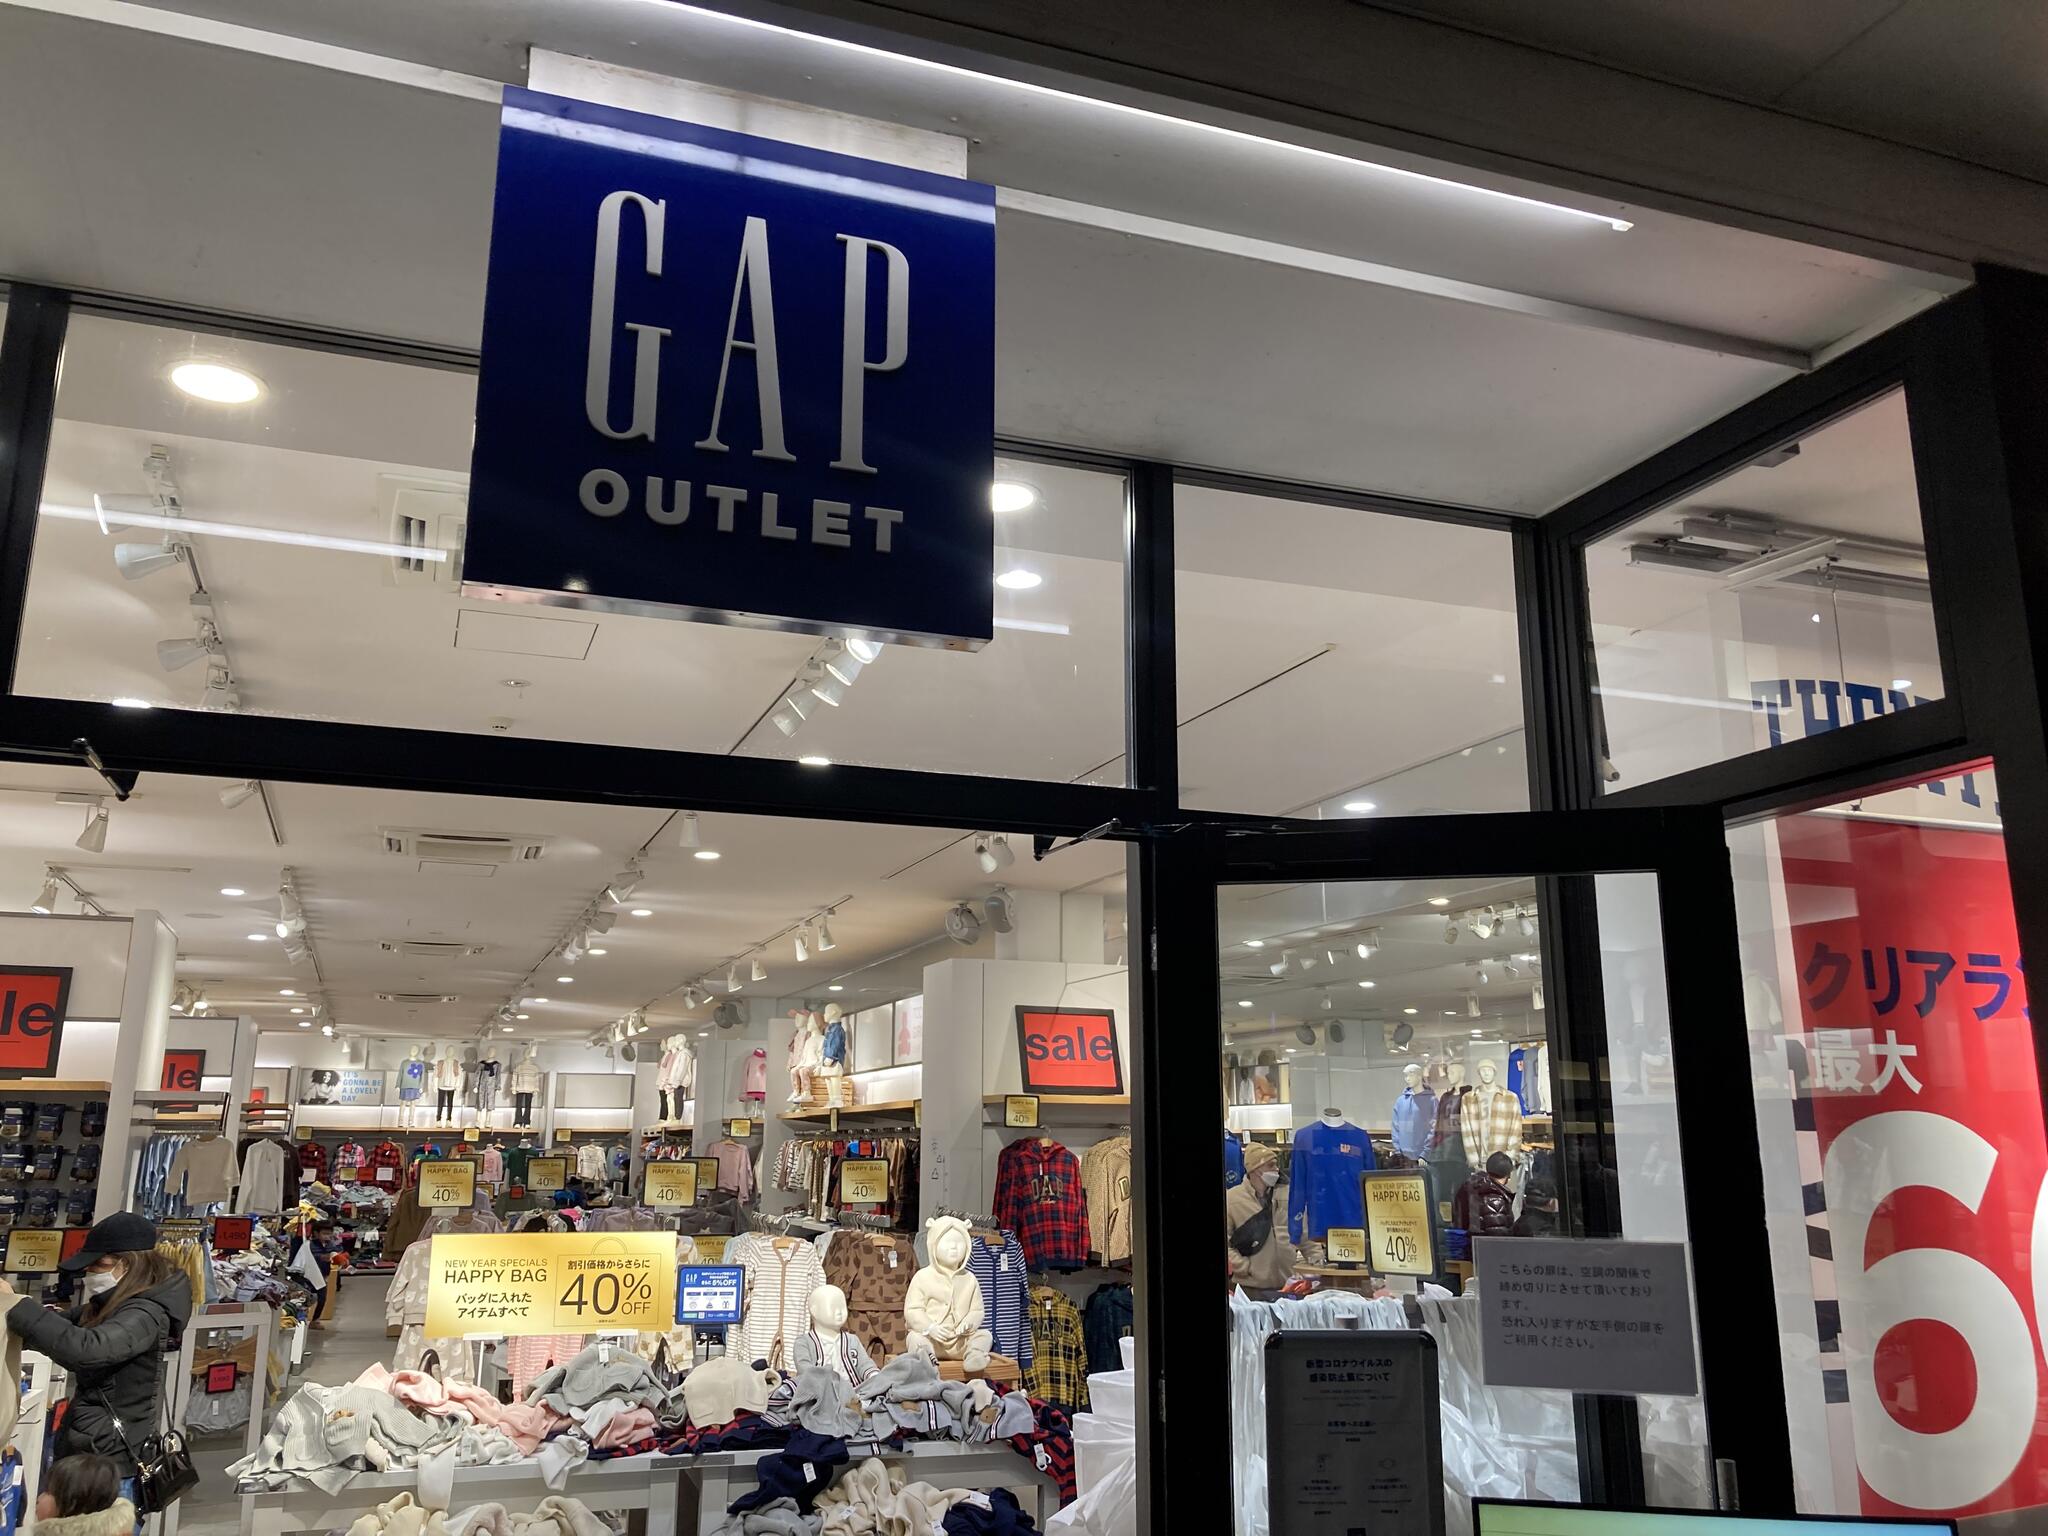 GAP Outlet 三井アウトレットパーク木更津店の代表写真3